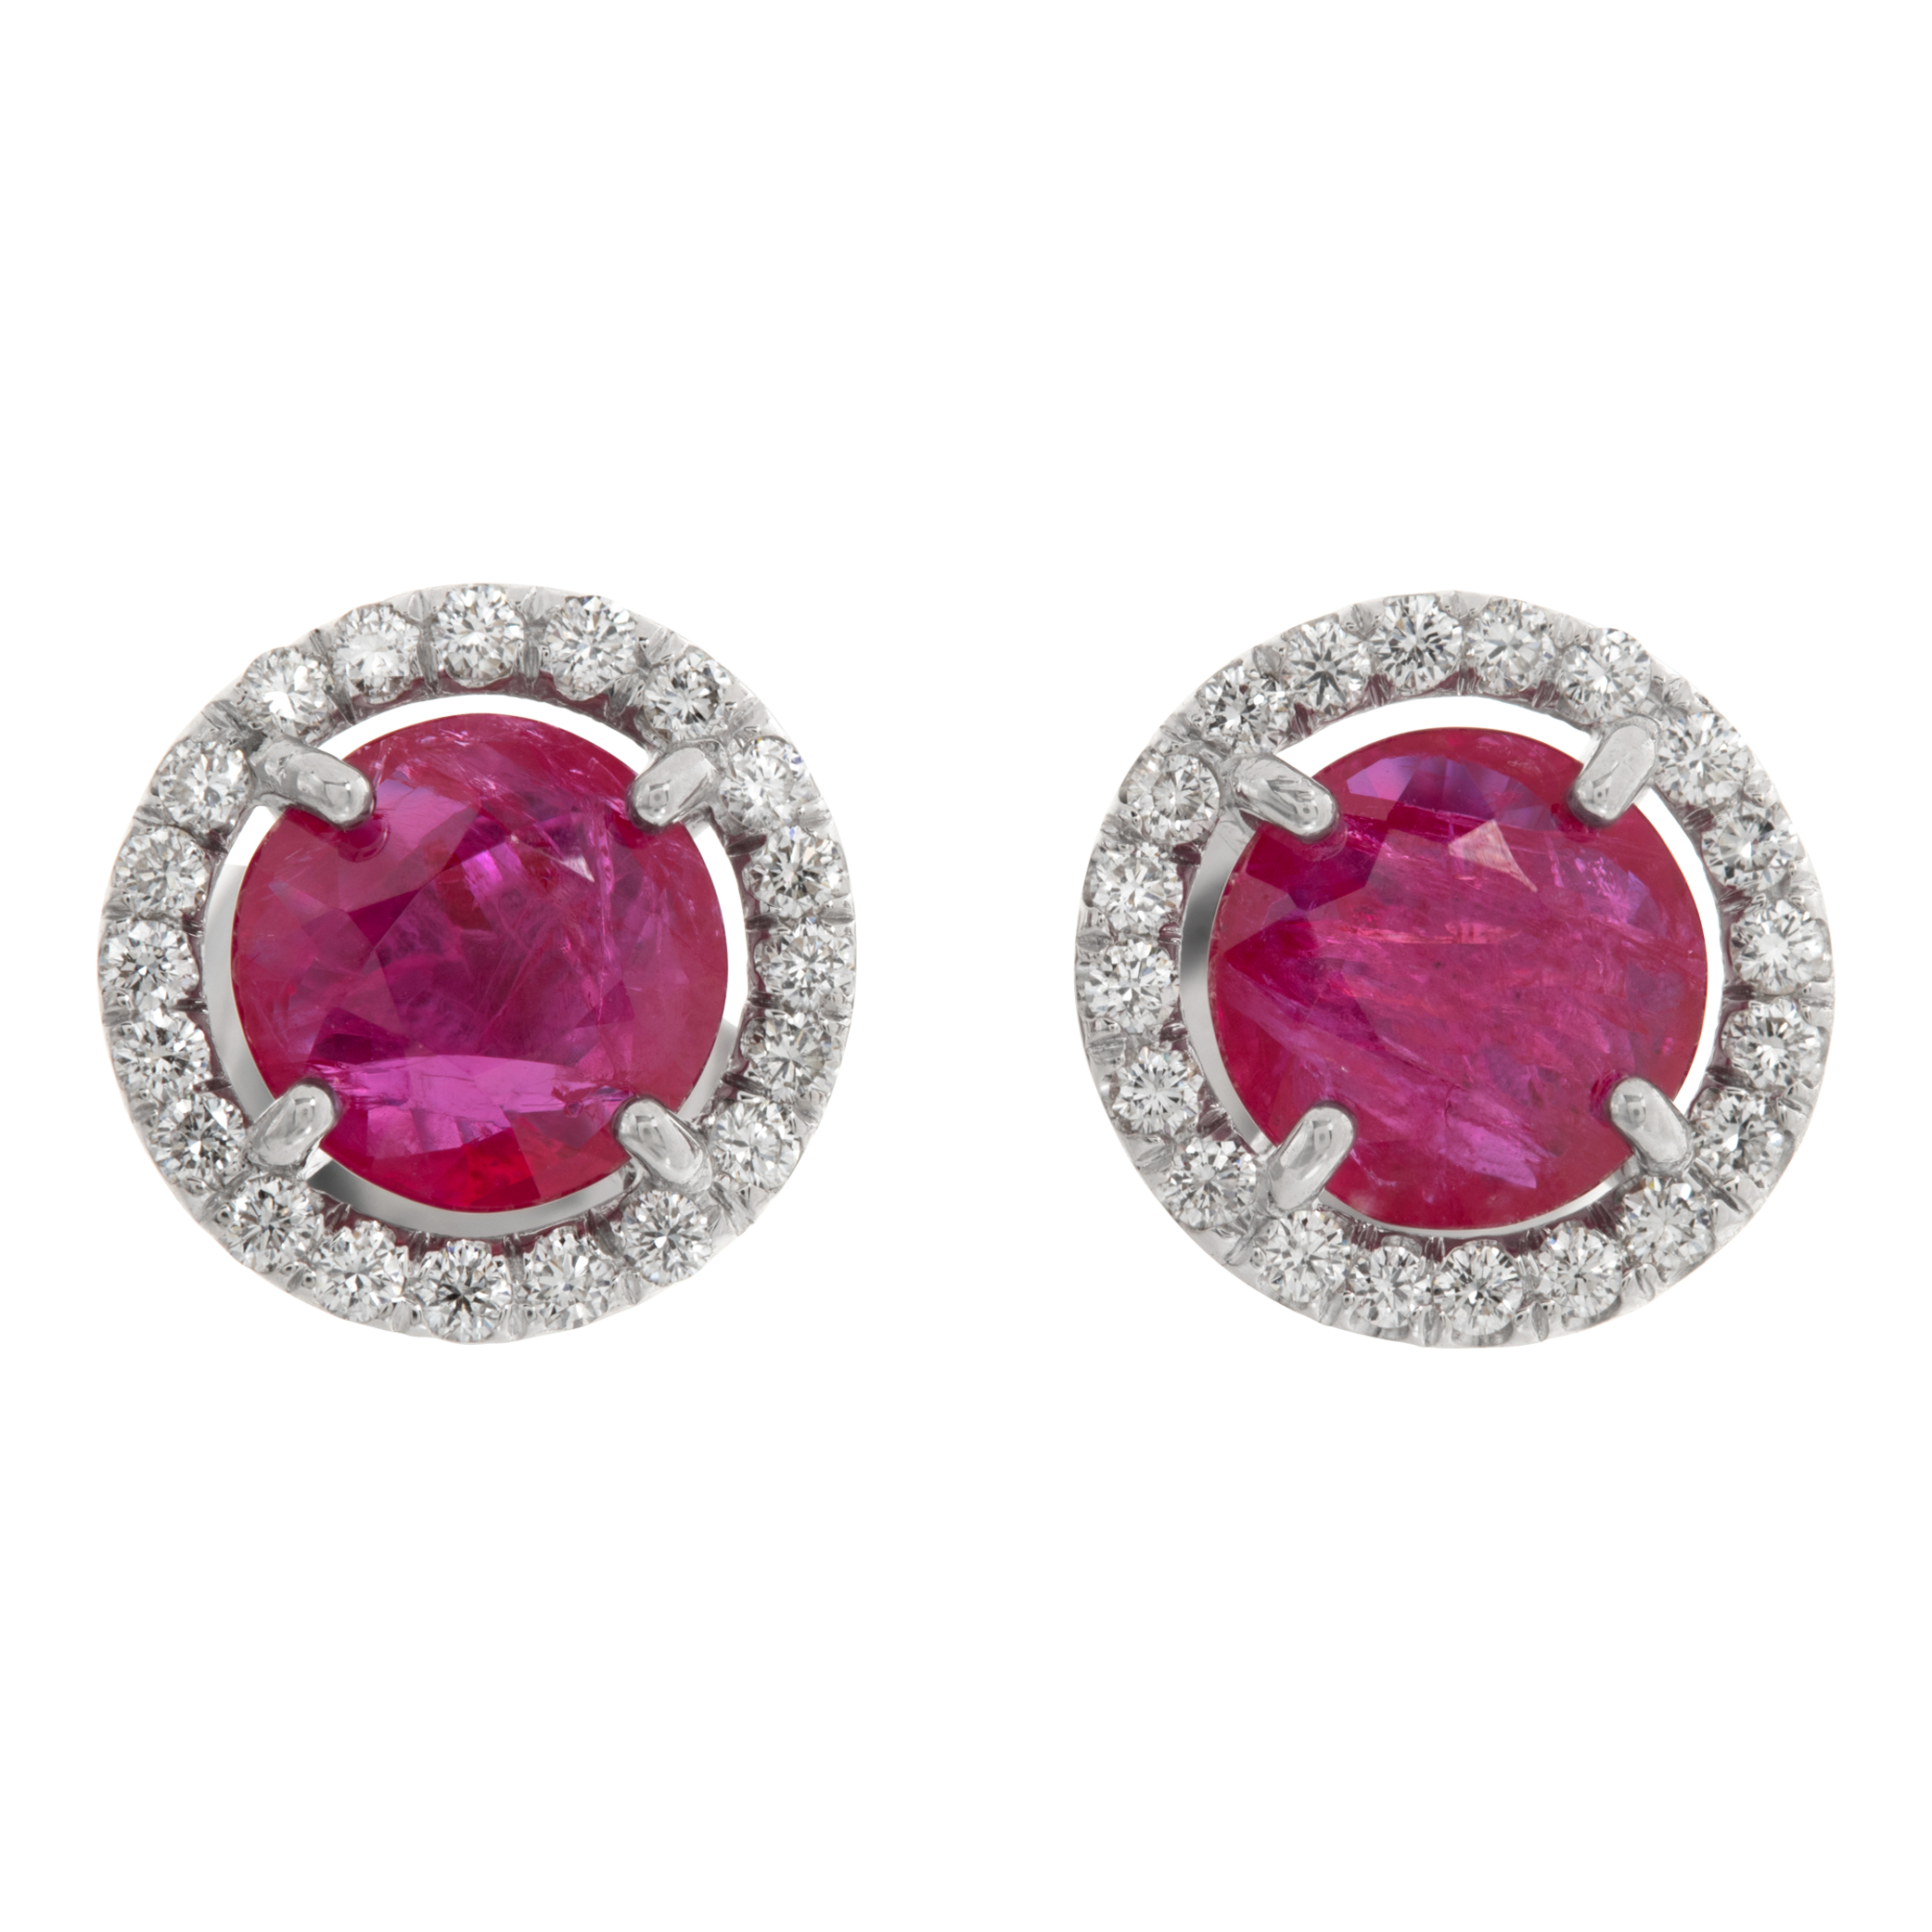 Round Brilliant cut rubies studs, in 18K white gold diamonds Halo setting.Approx 2.82 carats rubies.